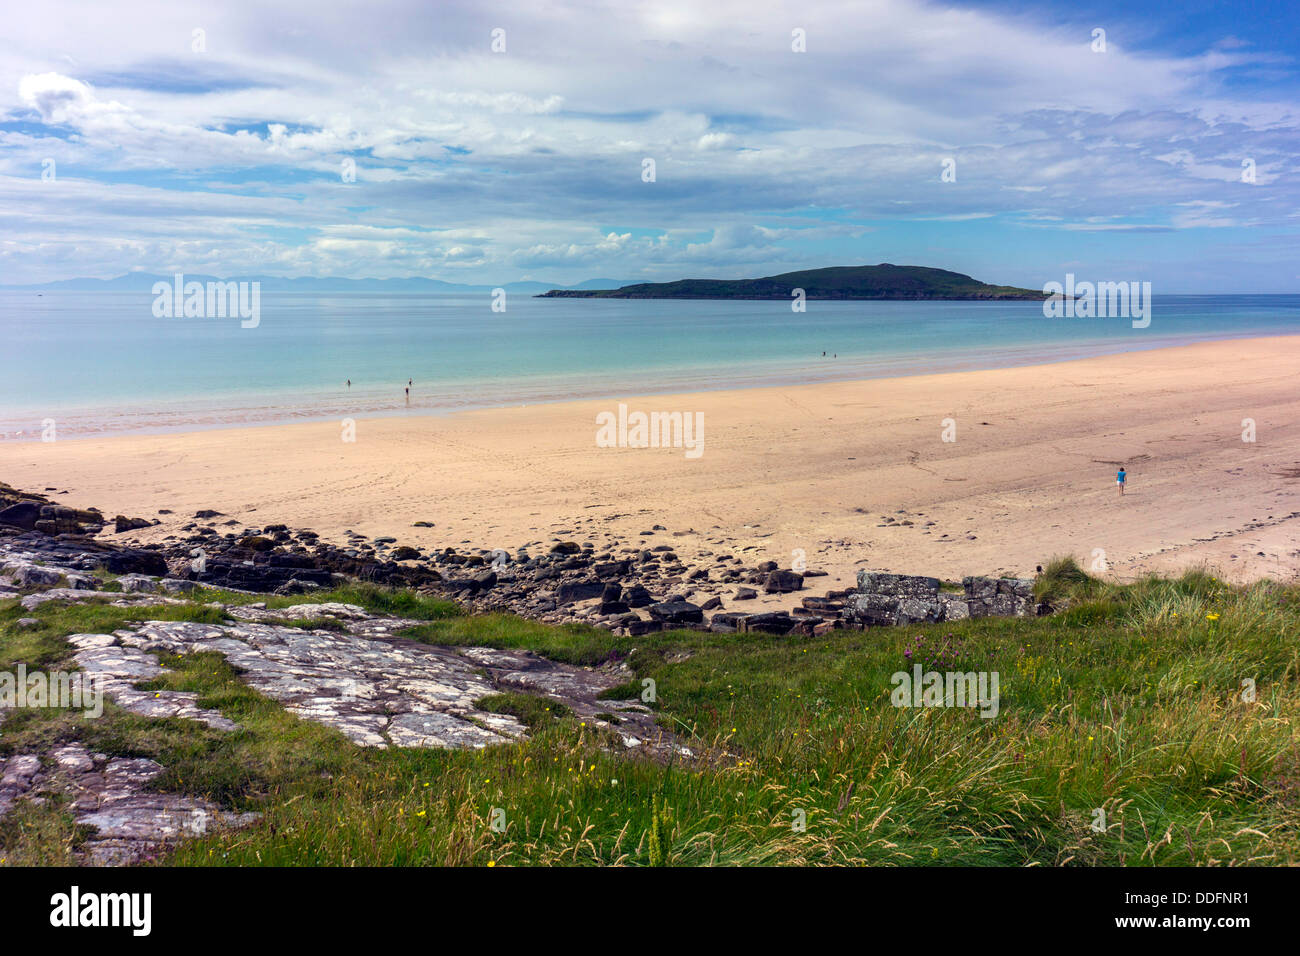 Small people in distance on wide sandy beach, sea and sky, Gairloch, Northwest Scotland, summer, holidays, Stock Photo